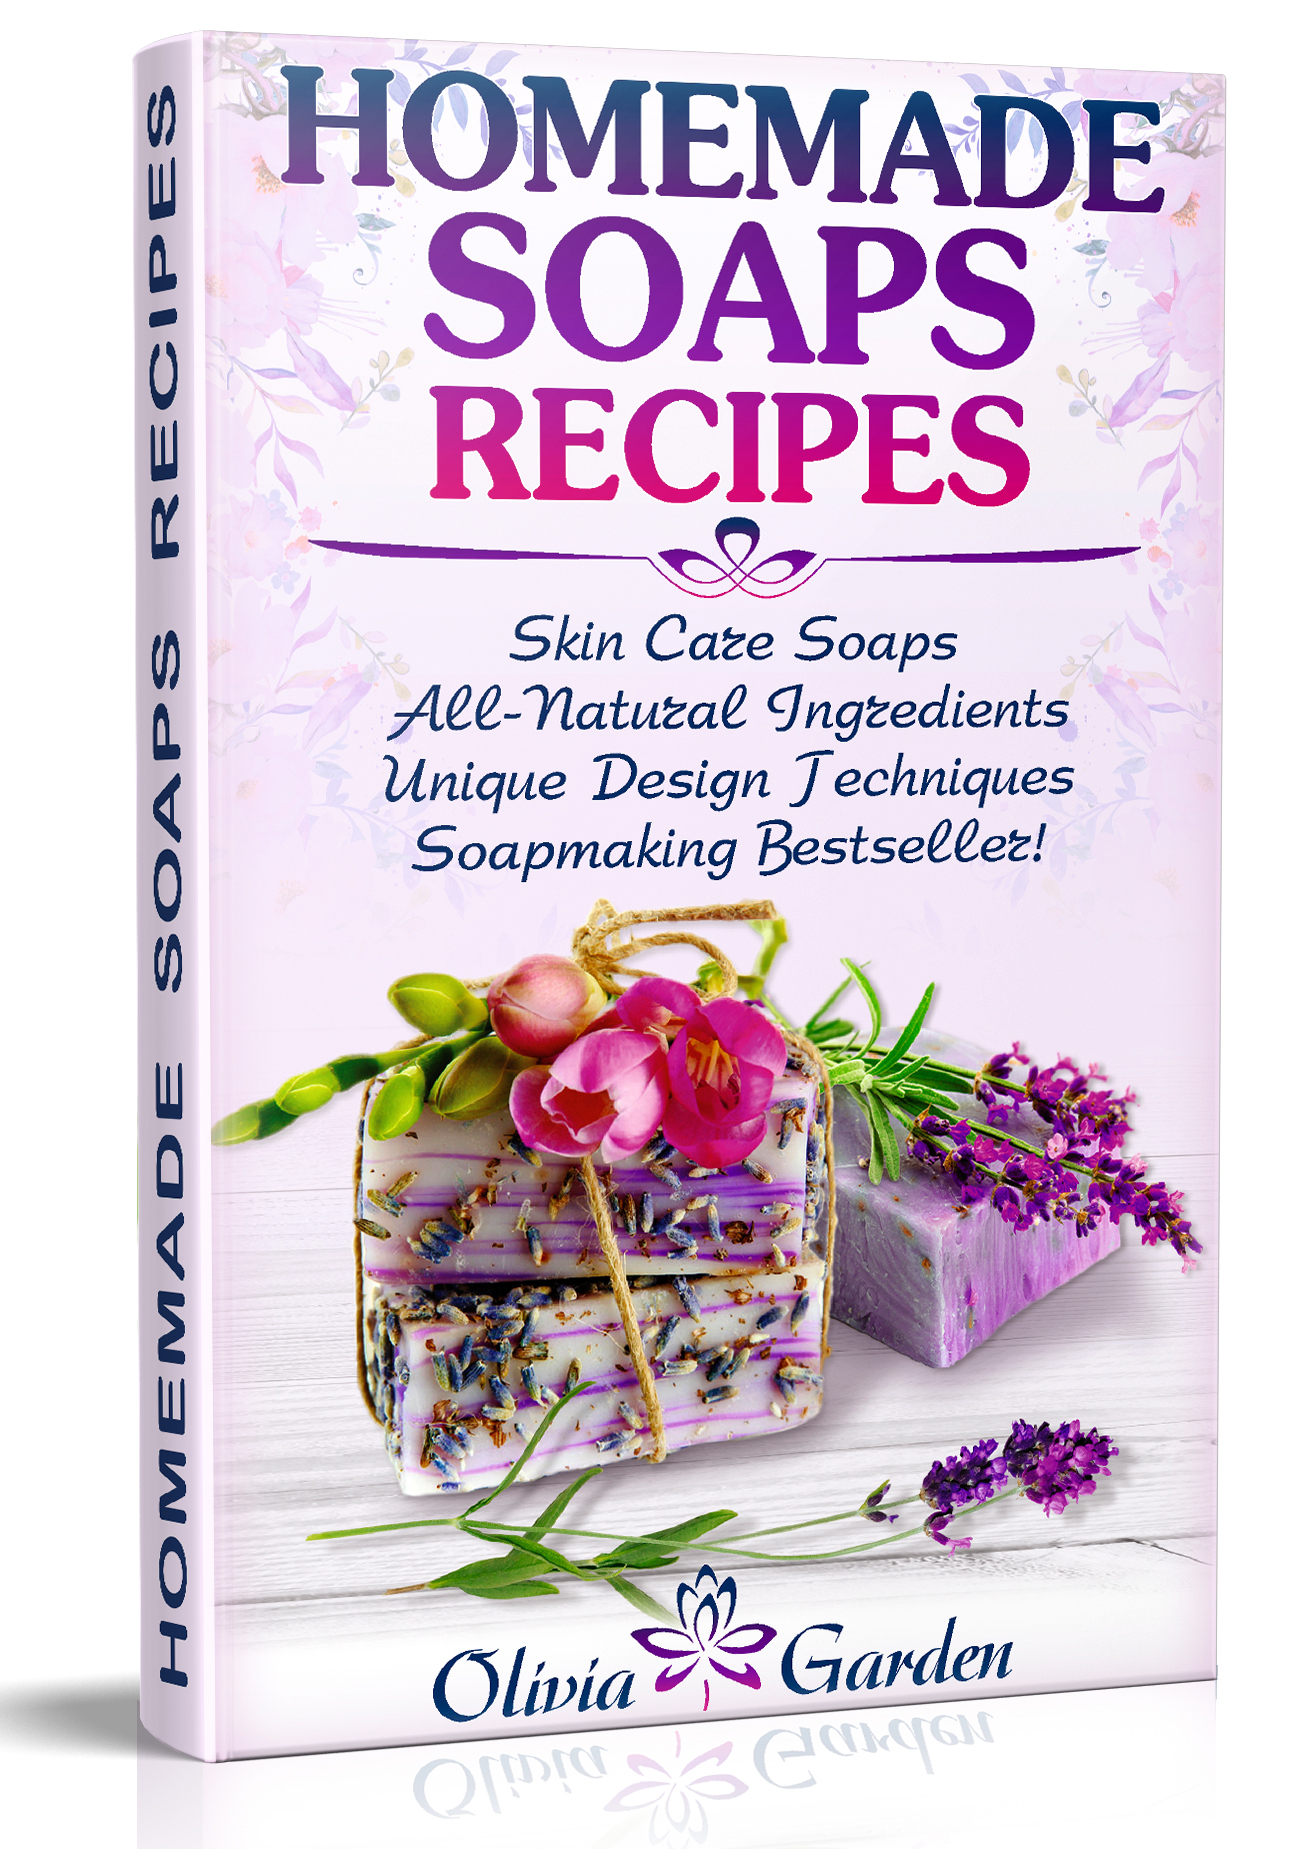 FREE: Homemade Soaps Recipes: Natural Handmade Soap, Soapmaking book with Step by Step Guidance for Cold Process of Soap Making ( How to Make Hand Made Soap, Ingredients, Soapmaking Supplies, Design Ideas) by Olivia Garden